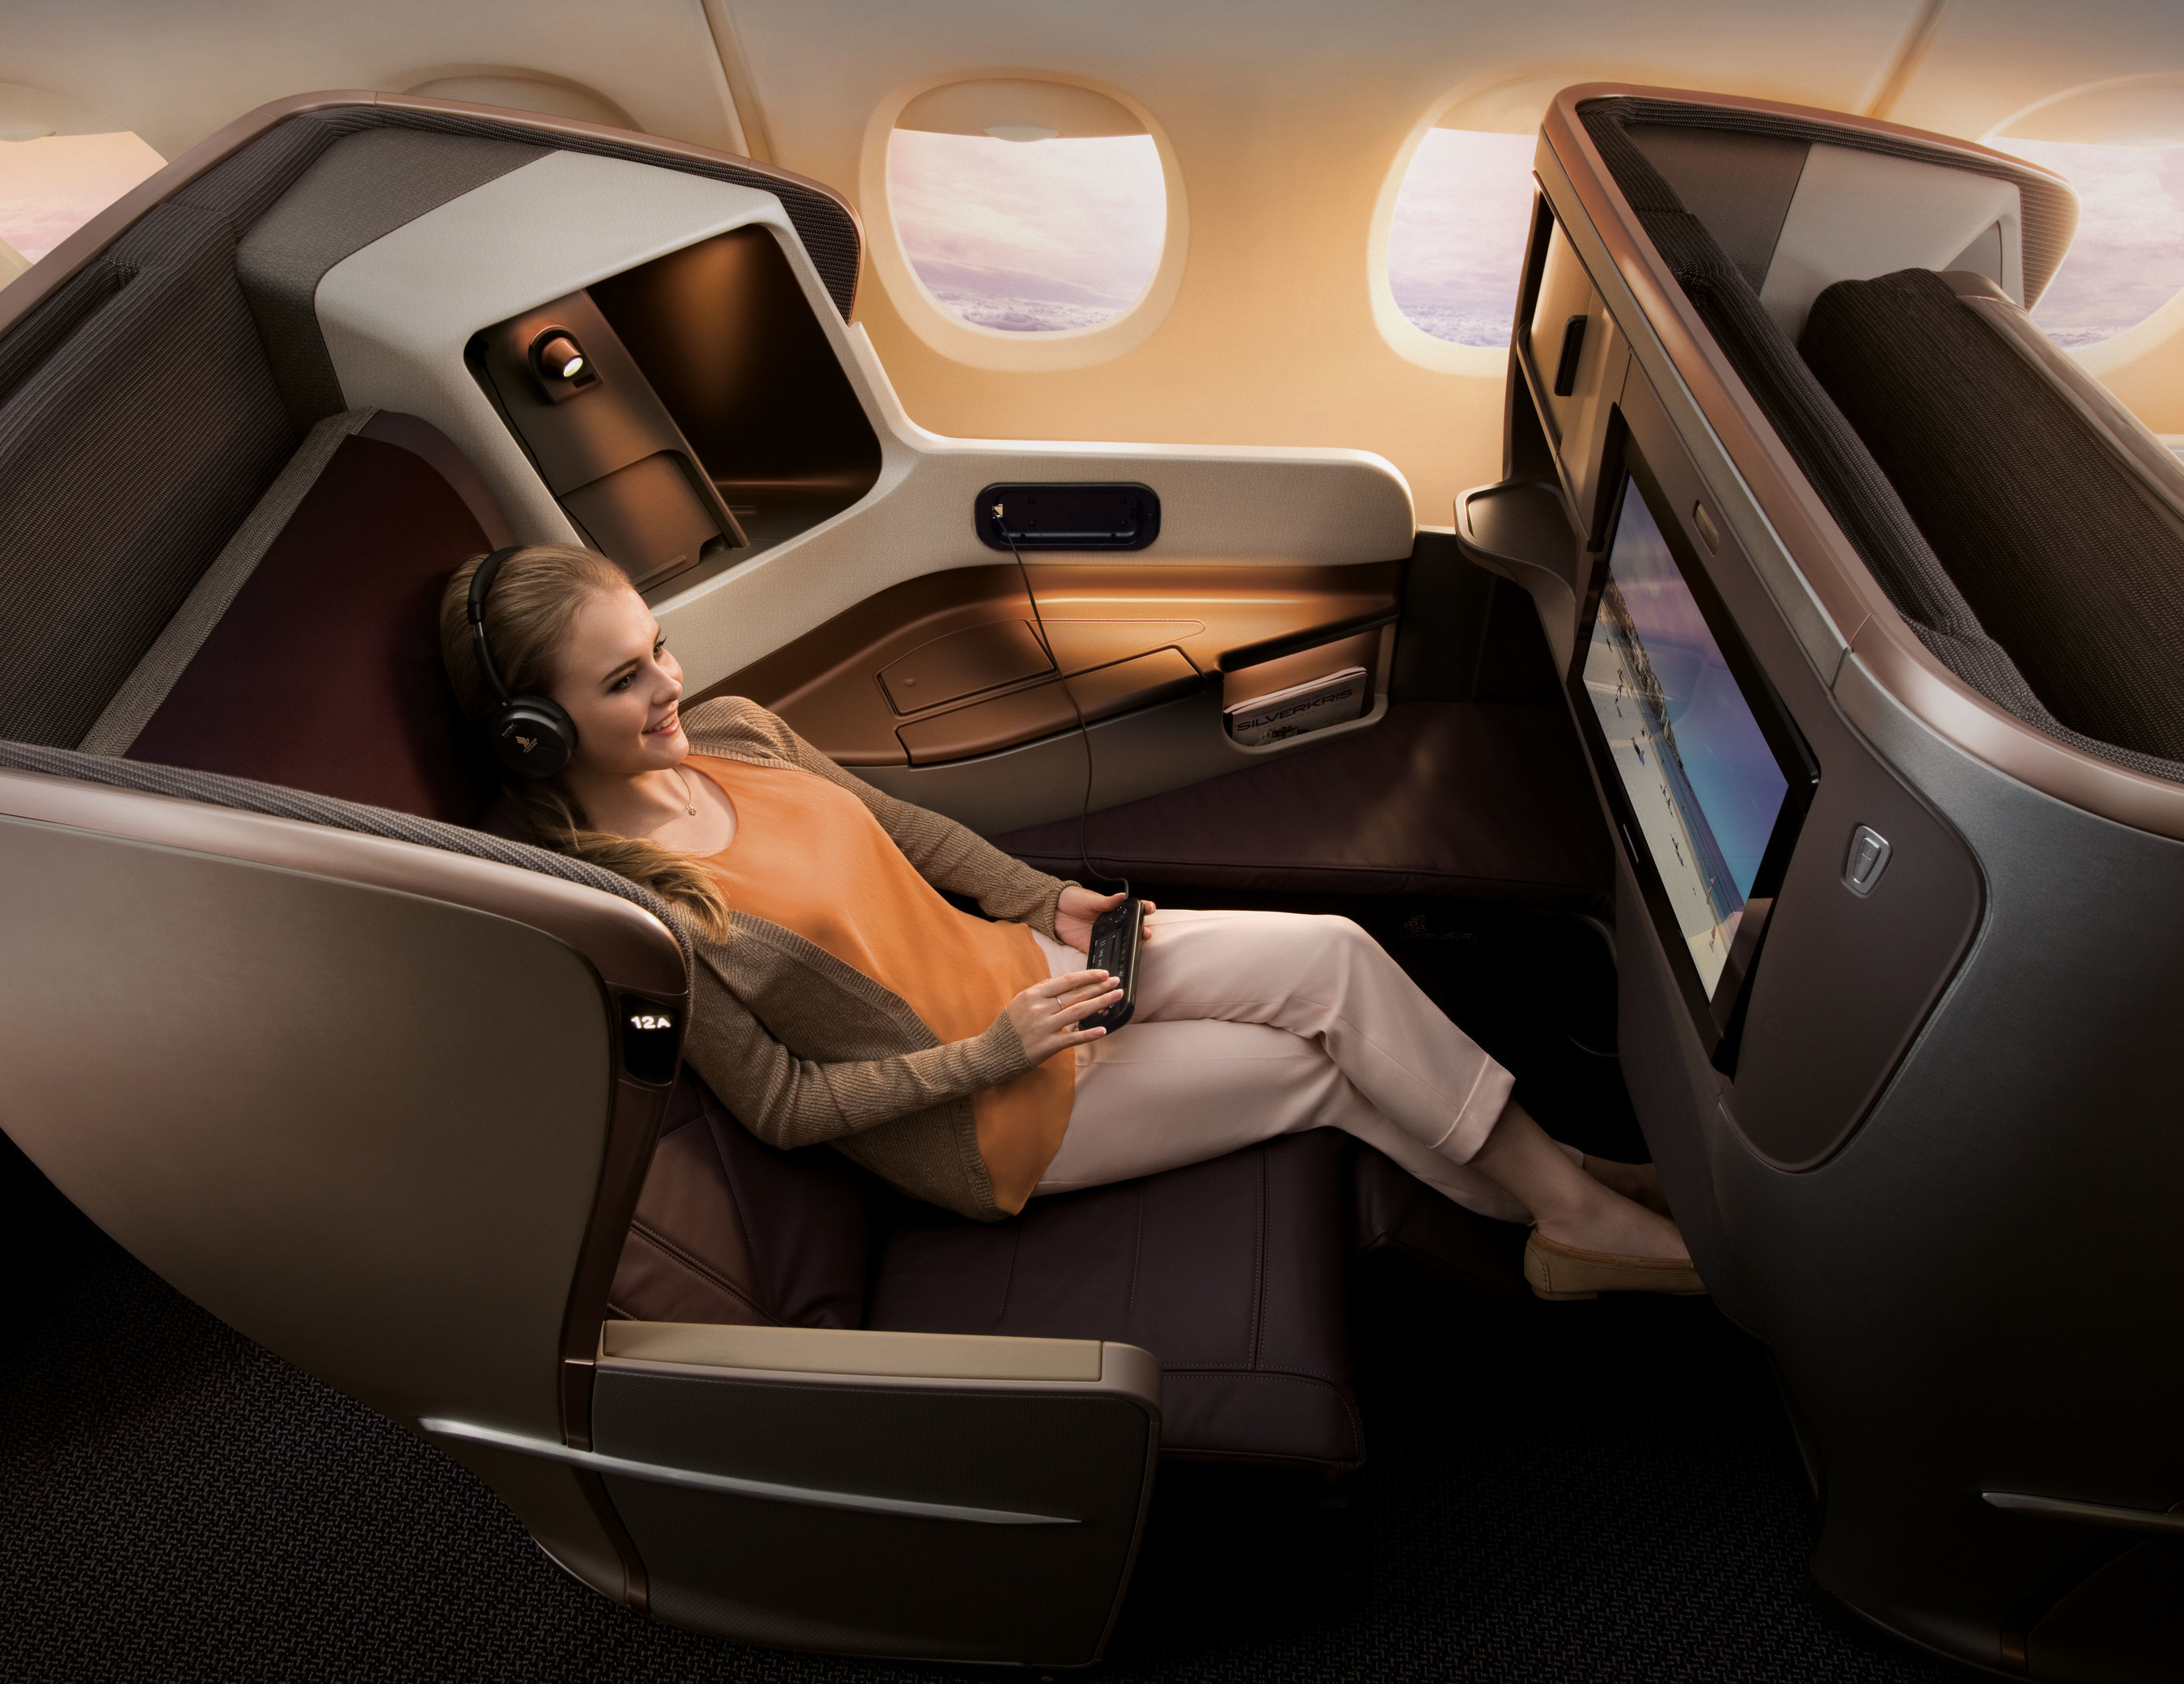 Beginning October 23, 2016, all flights from SFO and LAX will feature SIA's newest, next-generation aircraft interiors and seating in each cabin (pictured: Business Class).